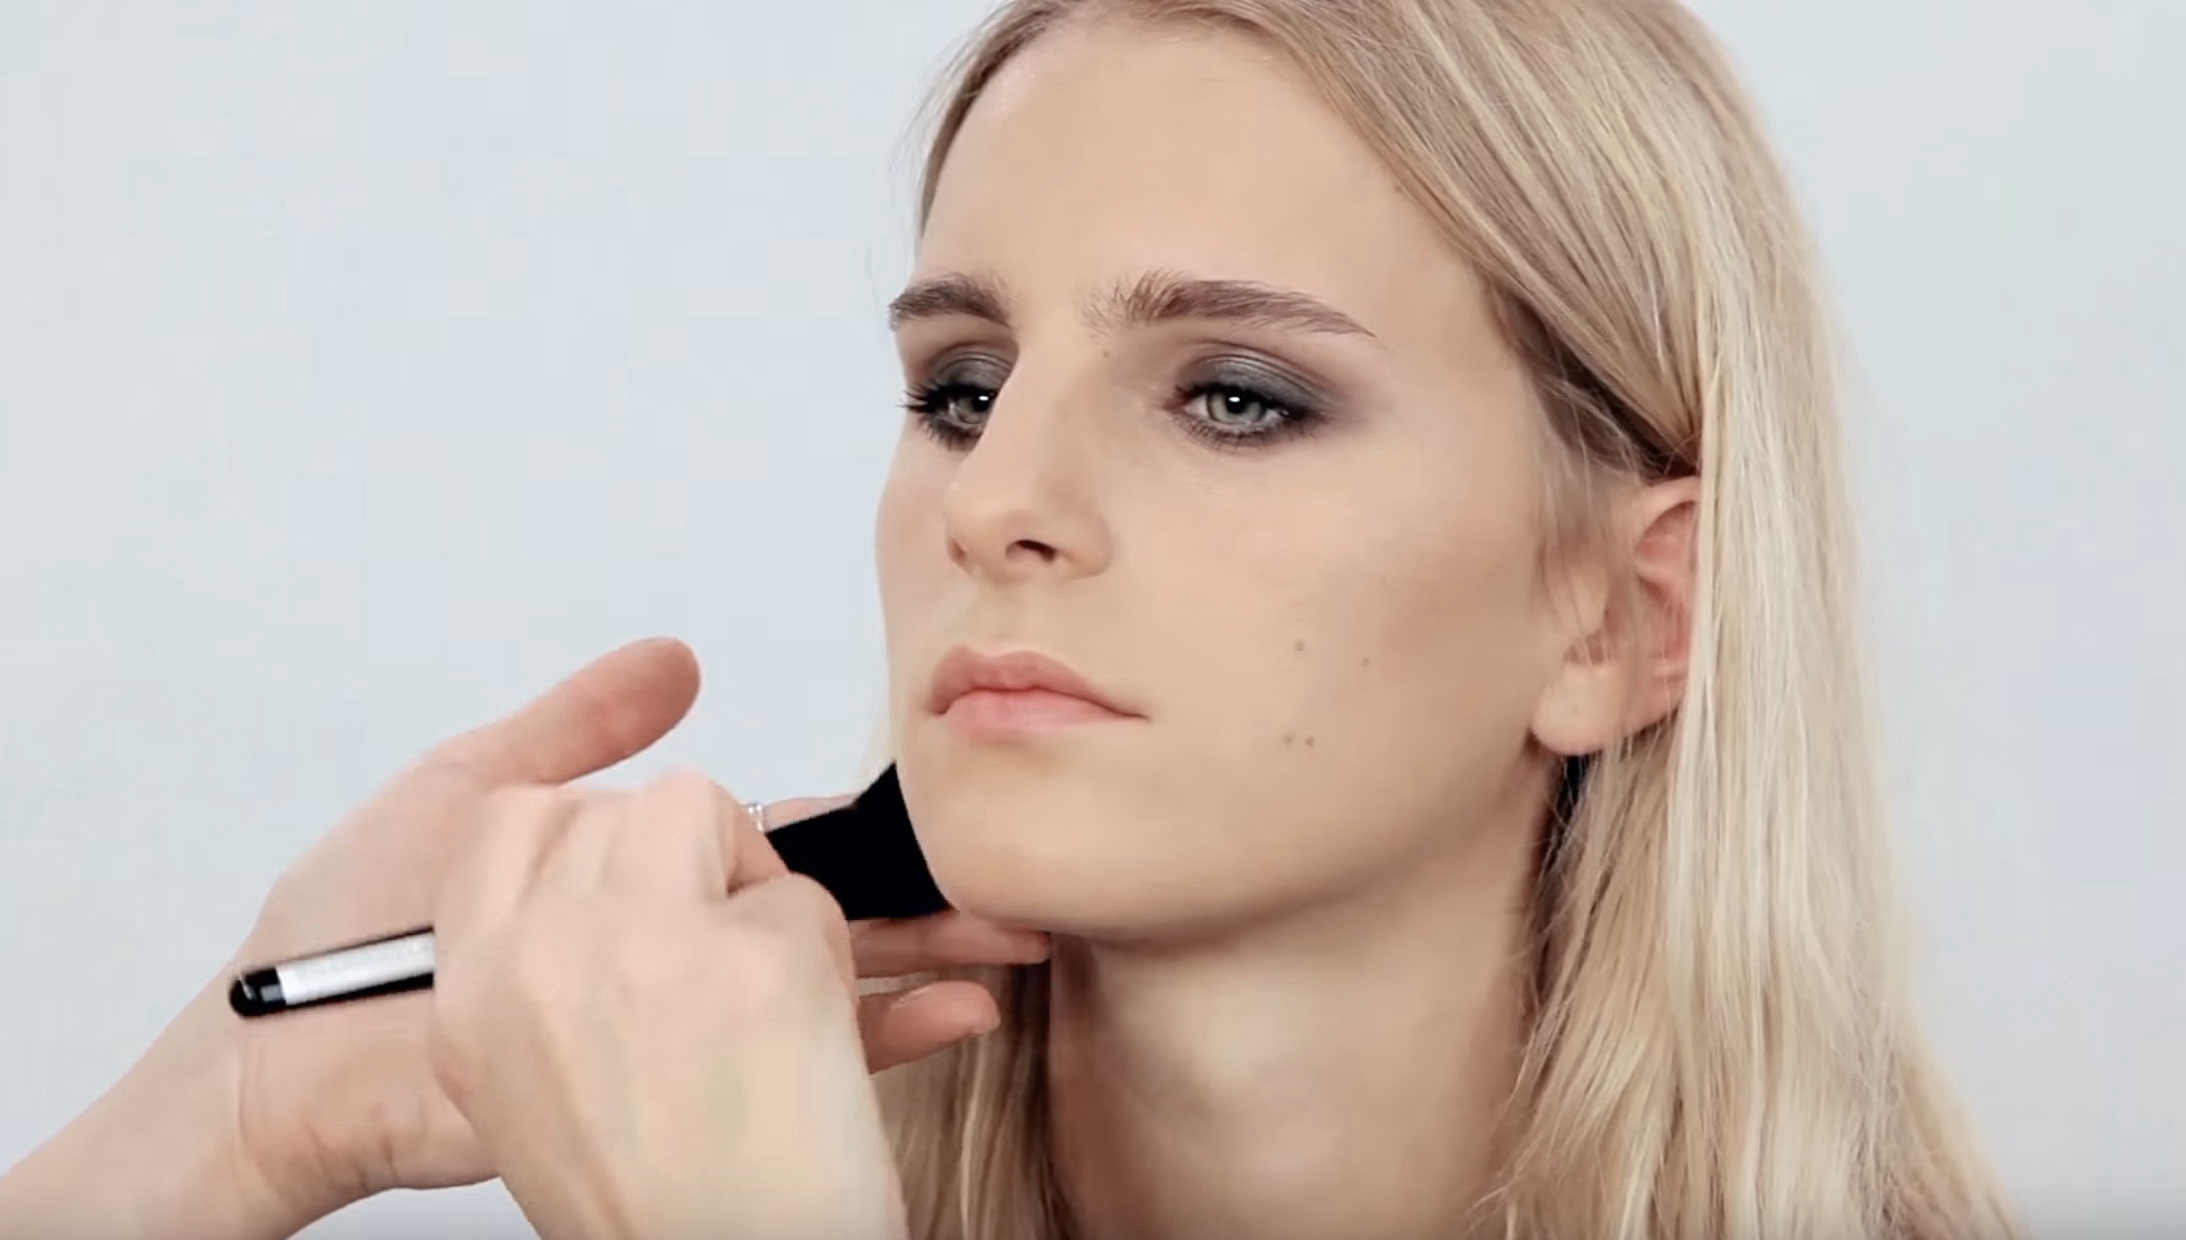 A young woman being made up by Louise Wittlich, withsoftly blended smokey eyes